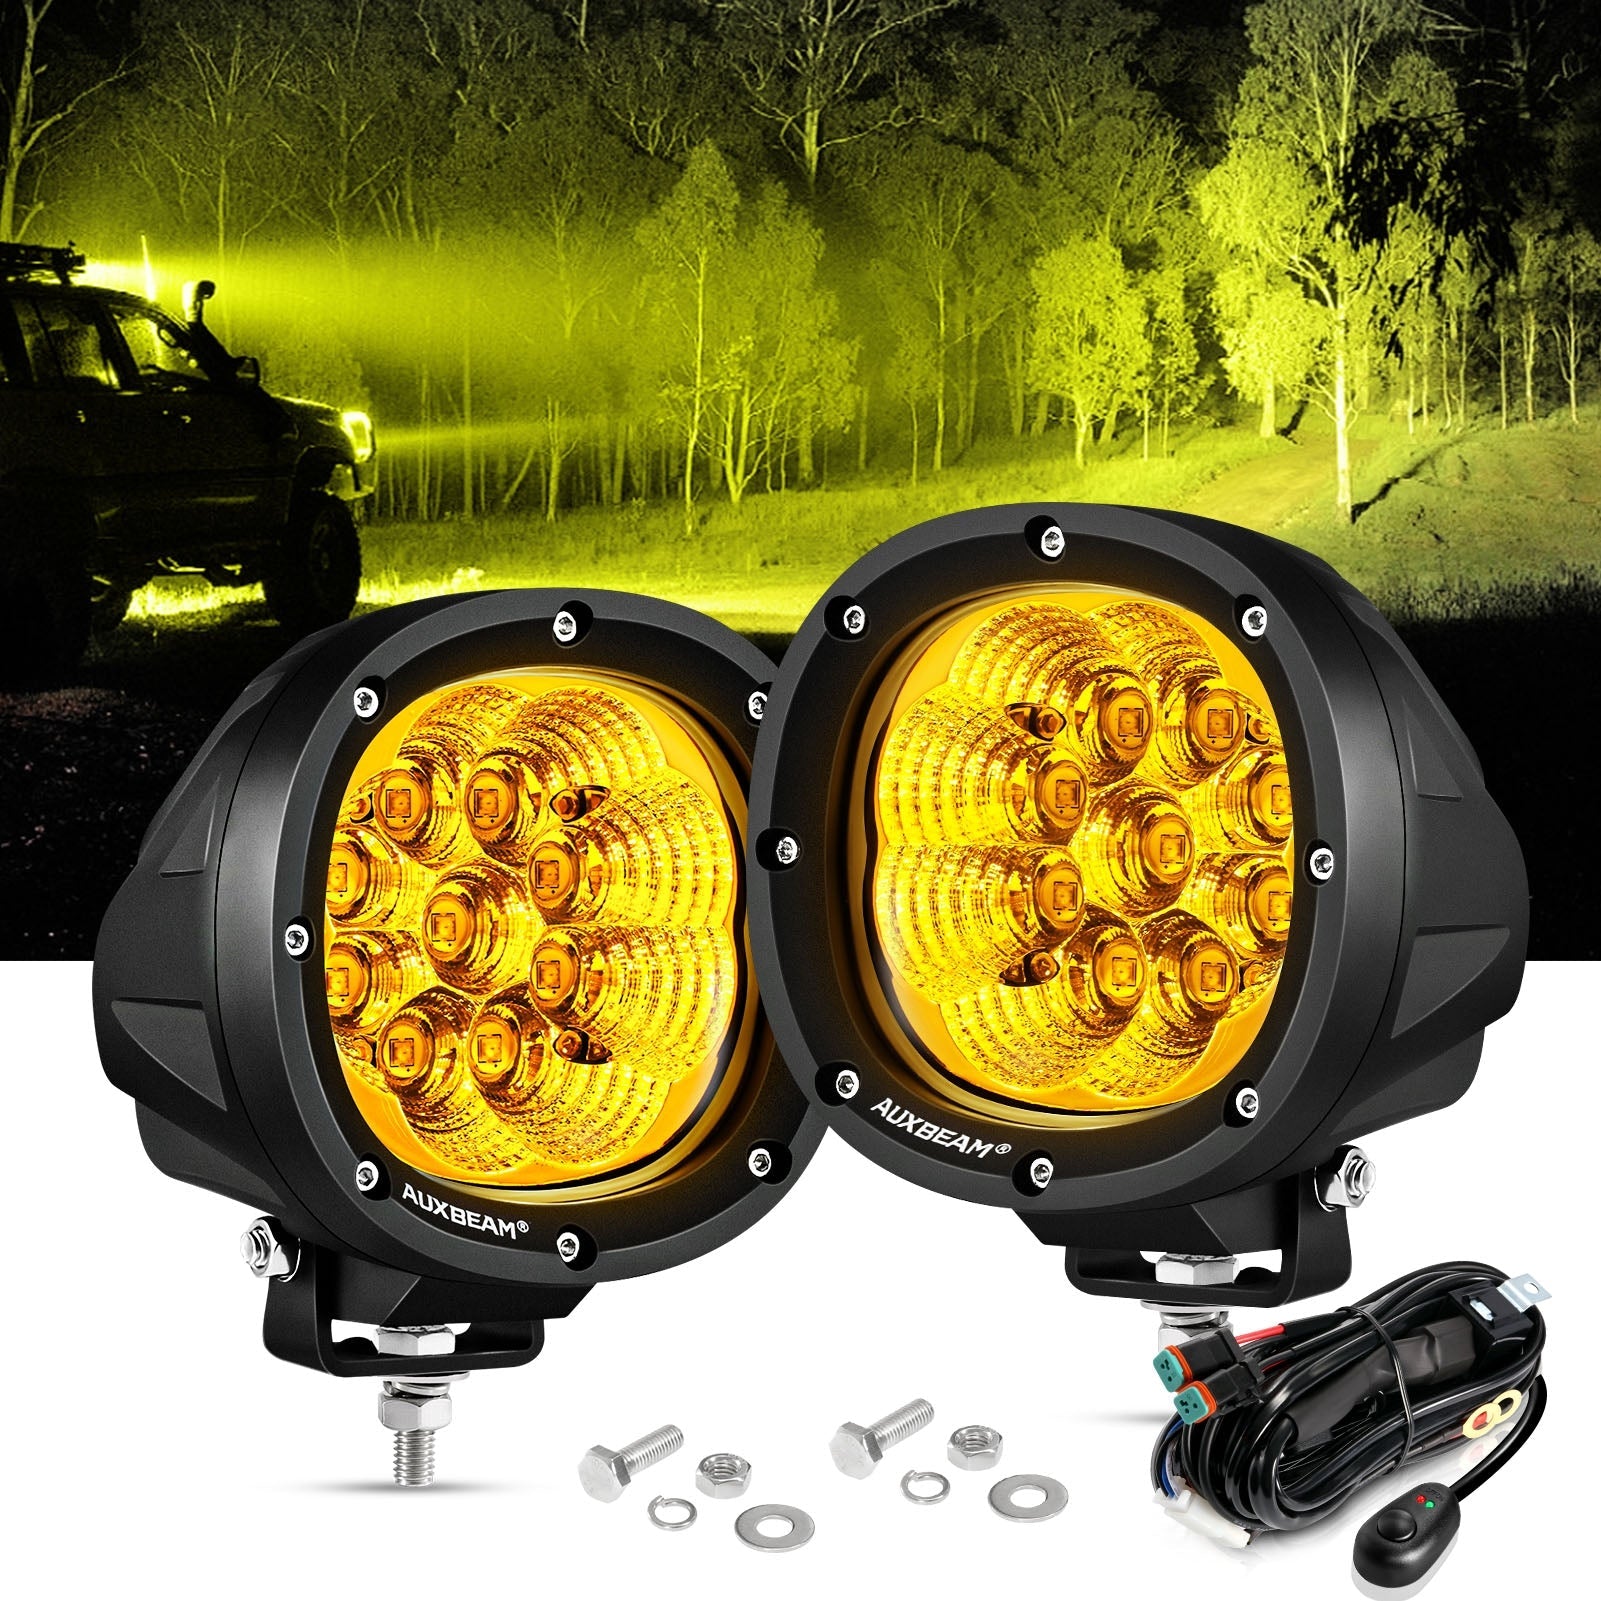 4 Inch 90W Round LED Driving Lights Flood Yellow Light with Wiring Harness for SUV ATV UTV Trucks Pickup Boat